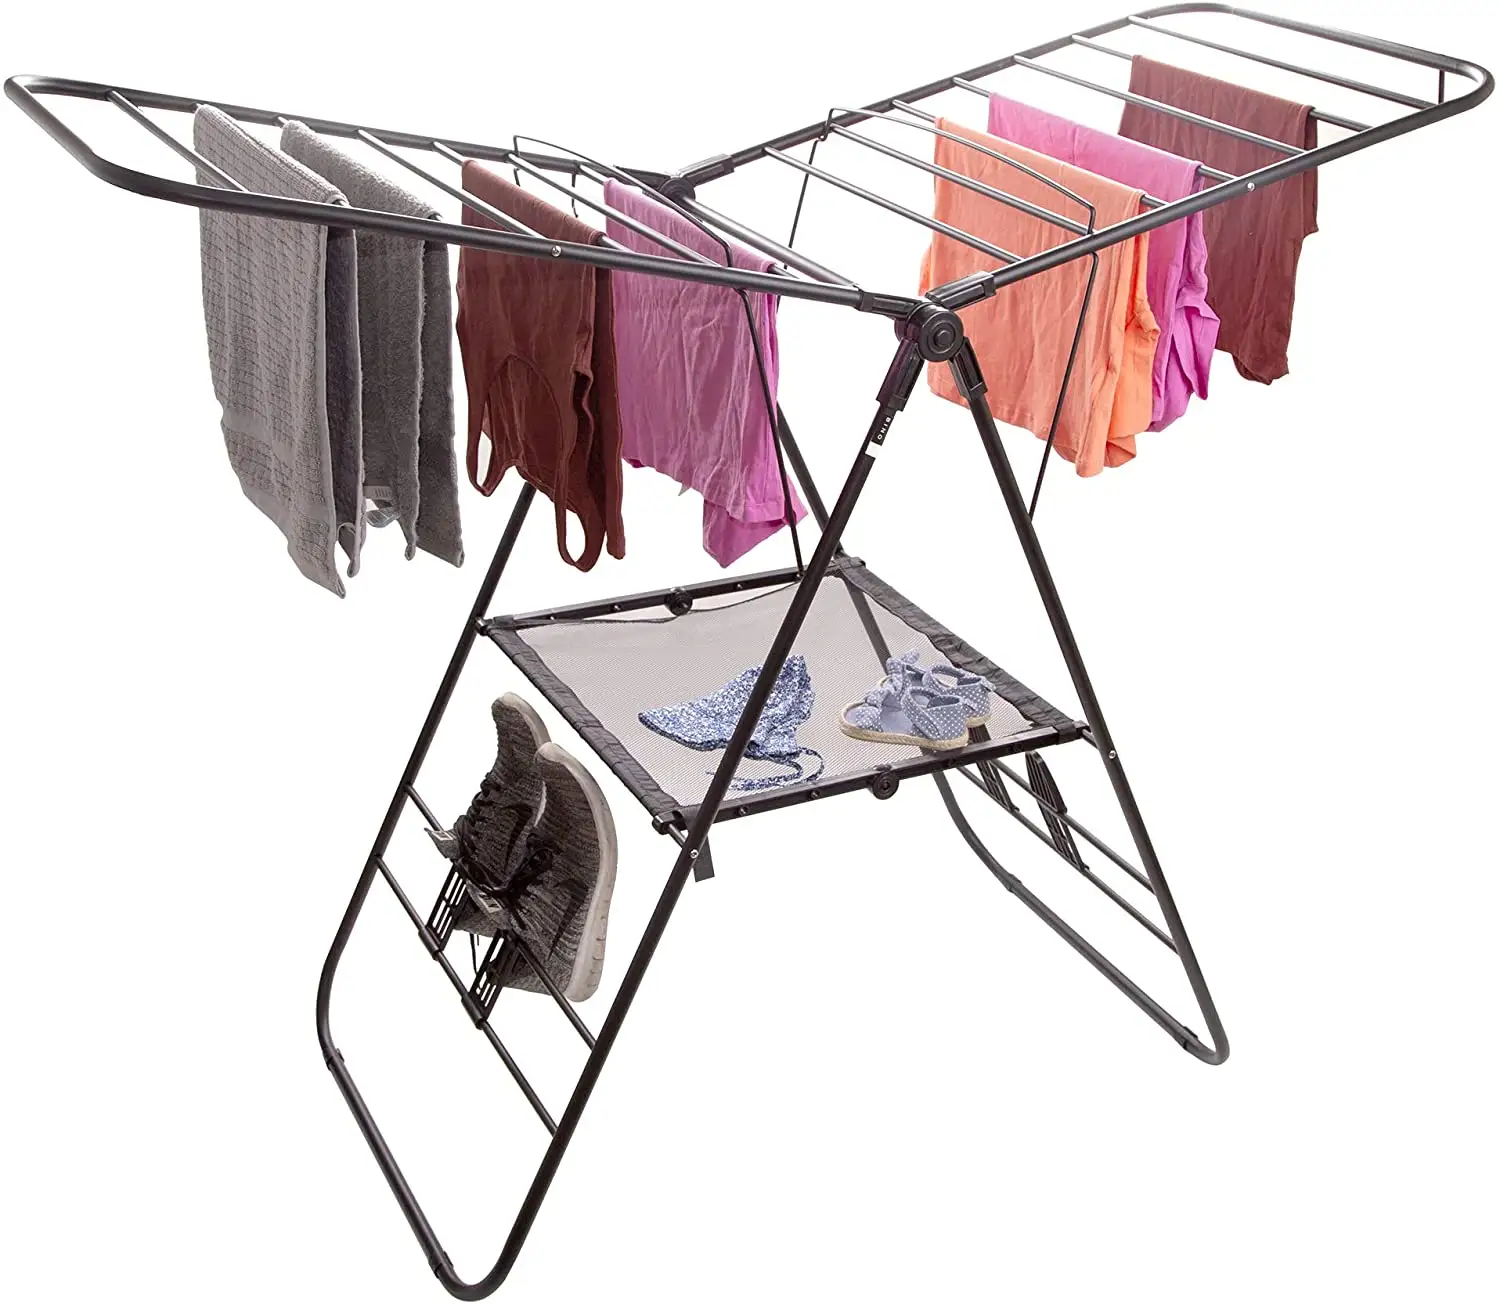 Multipurpose Outdoor balcony 3 tier airfoil vertical clothes dry stand retractable metal laundry clothes Hanger drying rack